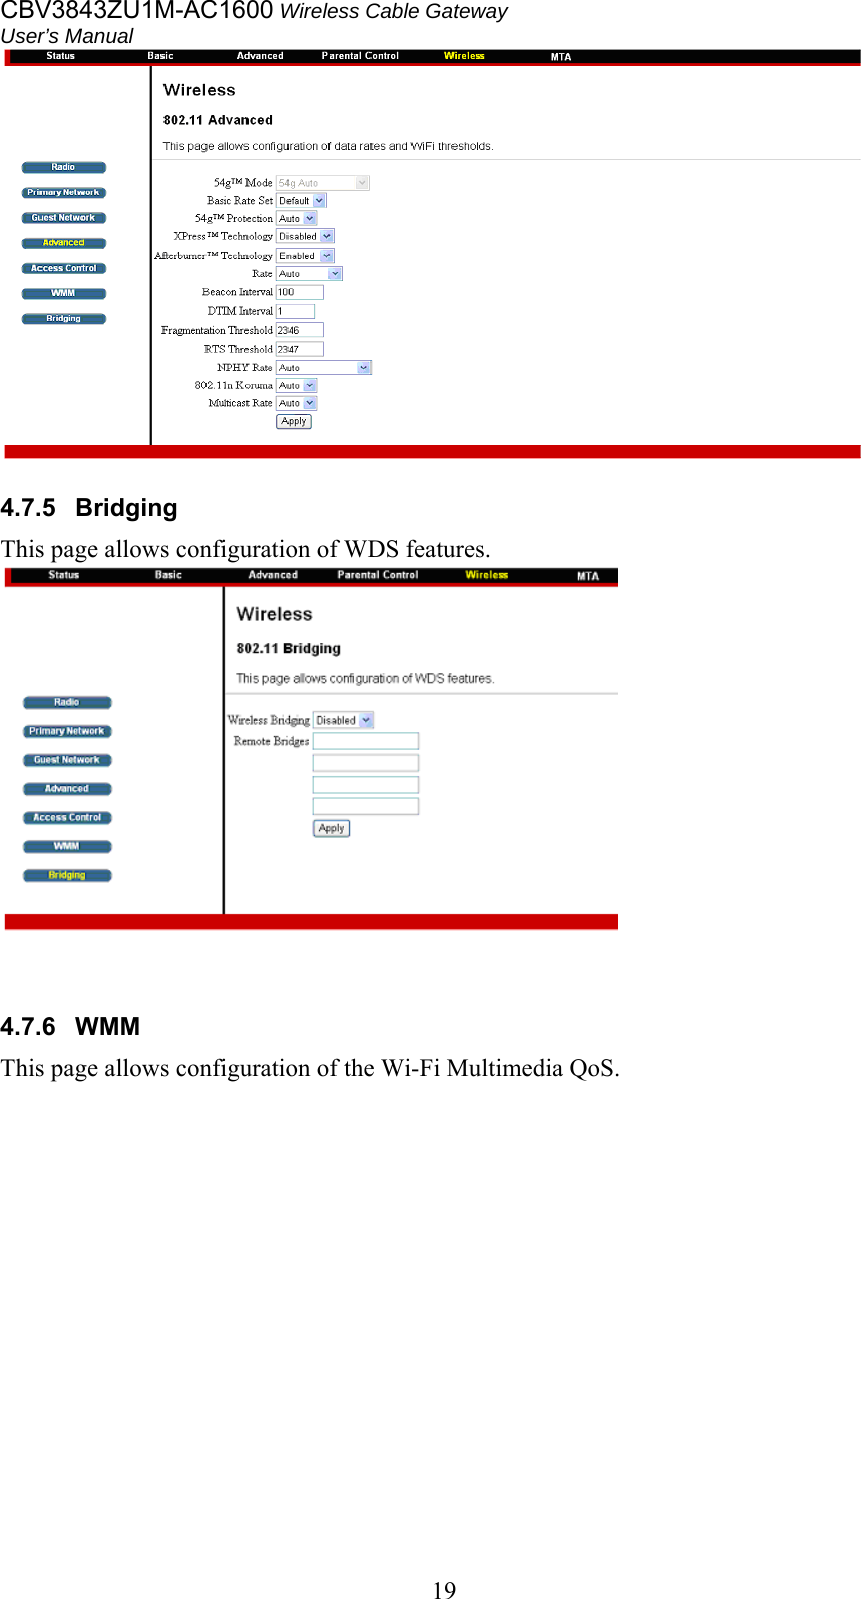 CBV3843ZU1M-AC1600 Wireless Cable Gateway  User’s Manual   19  4.7.5  Bridging This page allows configuration of WDS features.    4.7.6  WMM This page allows configuration of the Wi-Fi Multimedia QoS.   